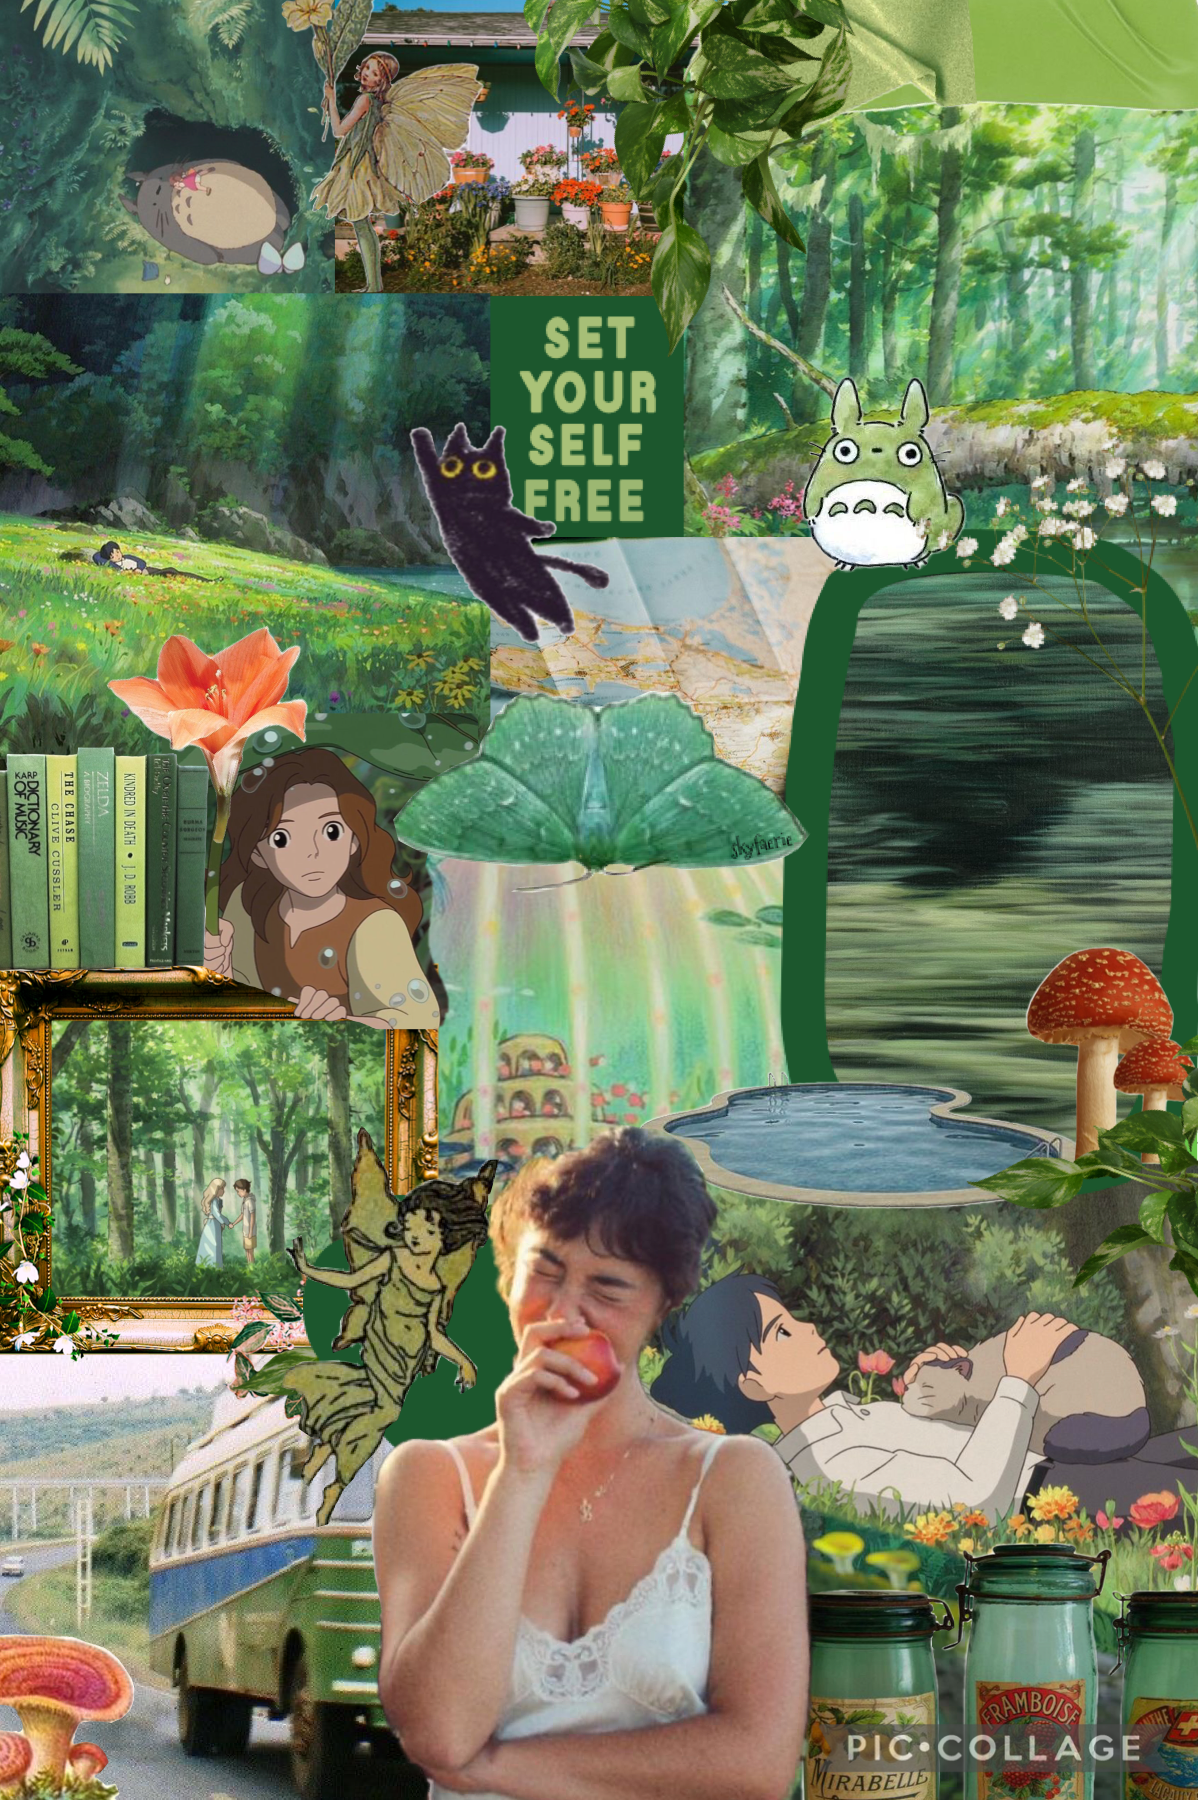 the studio ghibli movies in this collage: ponyo, my neighbour totoro, arrietty and when marnie was there 🦎🪐🧩🐉🧚🏼🚃